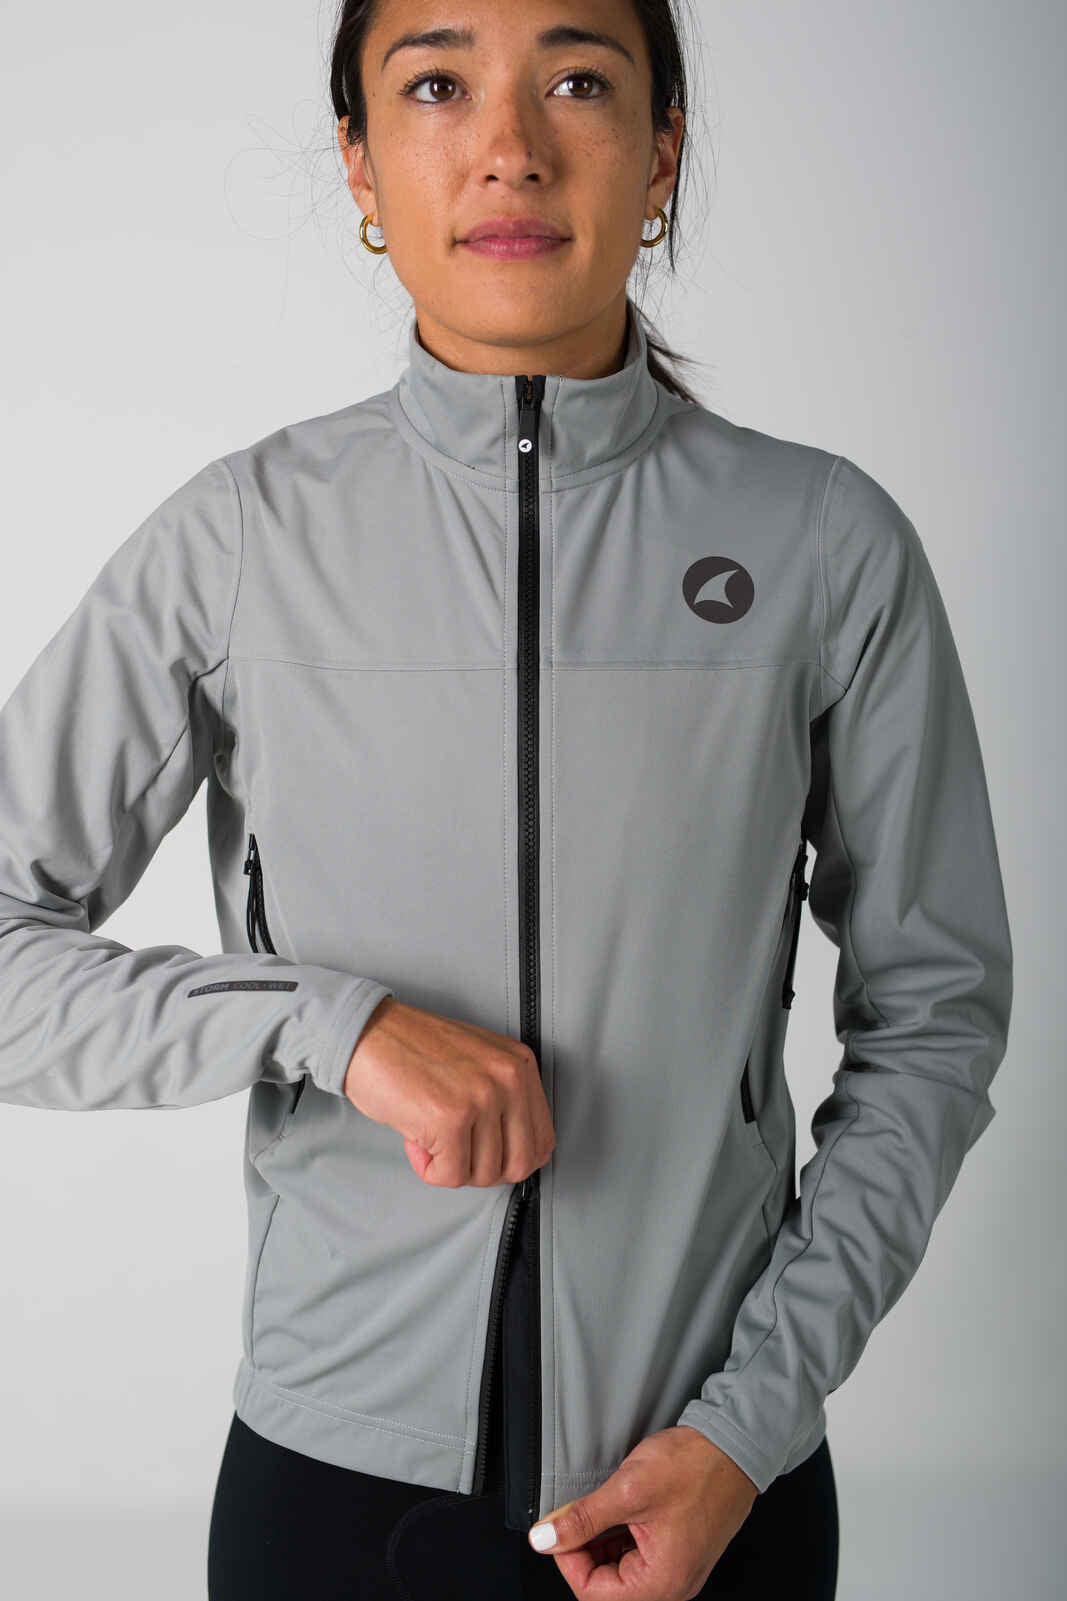 Women's Gray Cycling Jacket for Cold Wet Weather - Zipper Detail